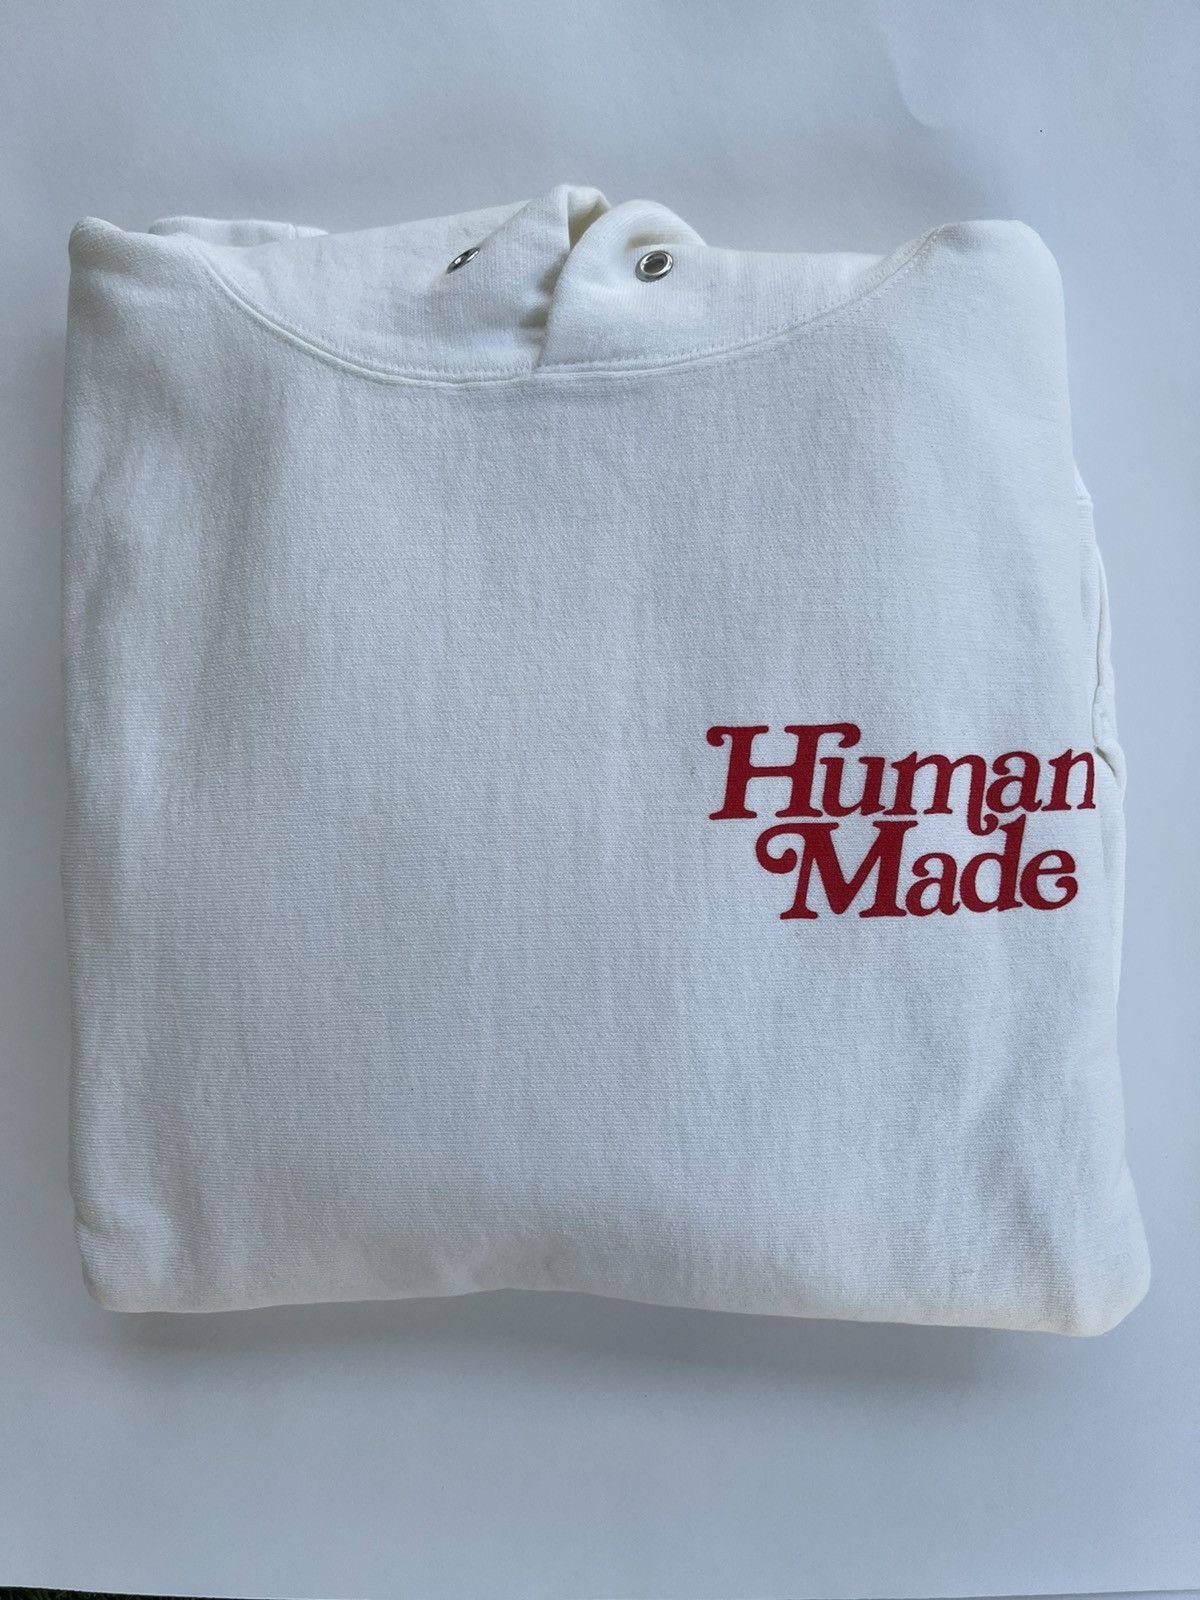 Human Made Human Made x Girls Don't Cry Logo Hoodie in White Size XL |  Grailed